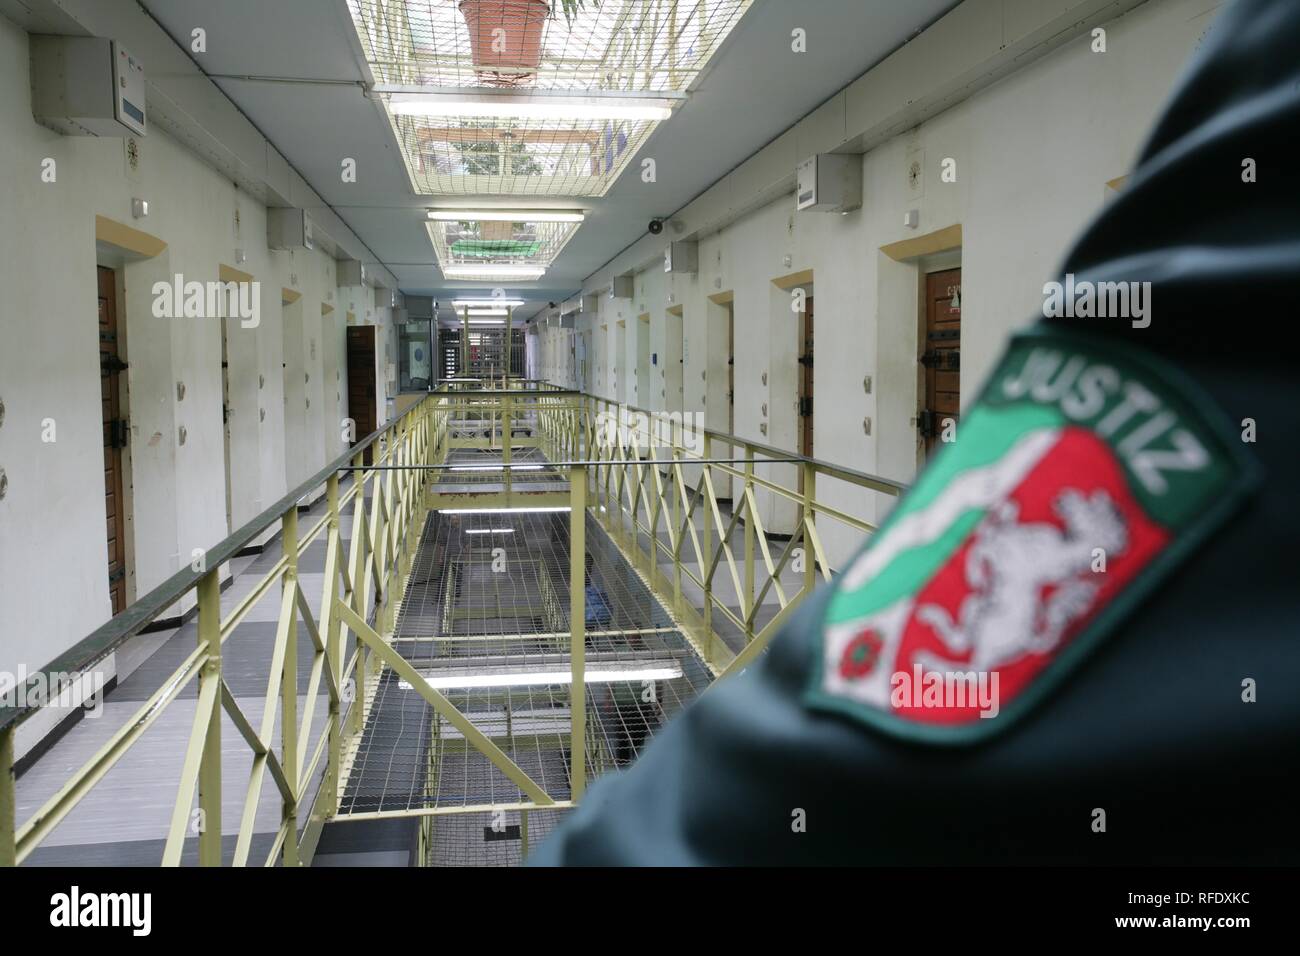 Prison Officer Corridor High Resolution Stock Photography and Images - Alamy